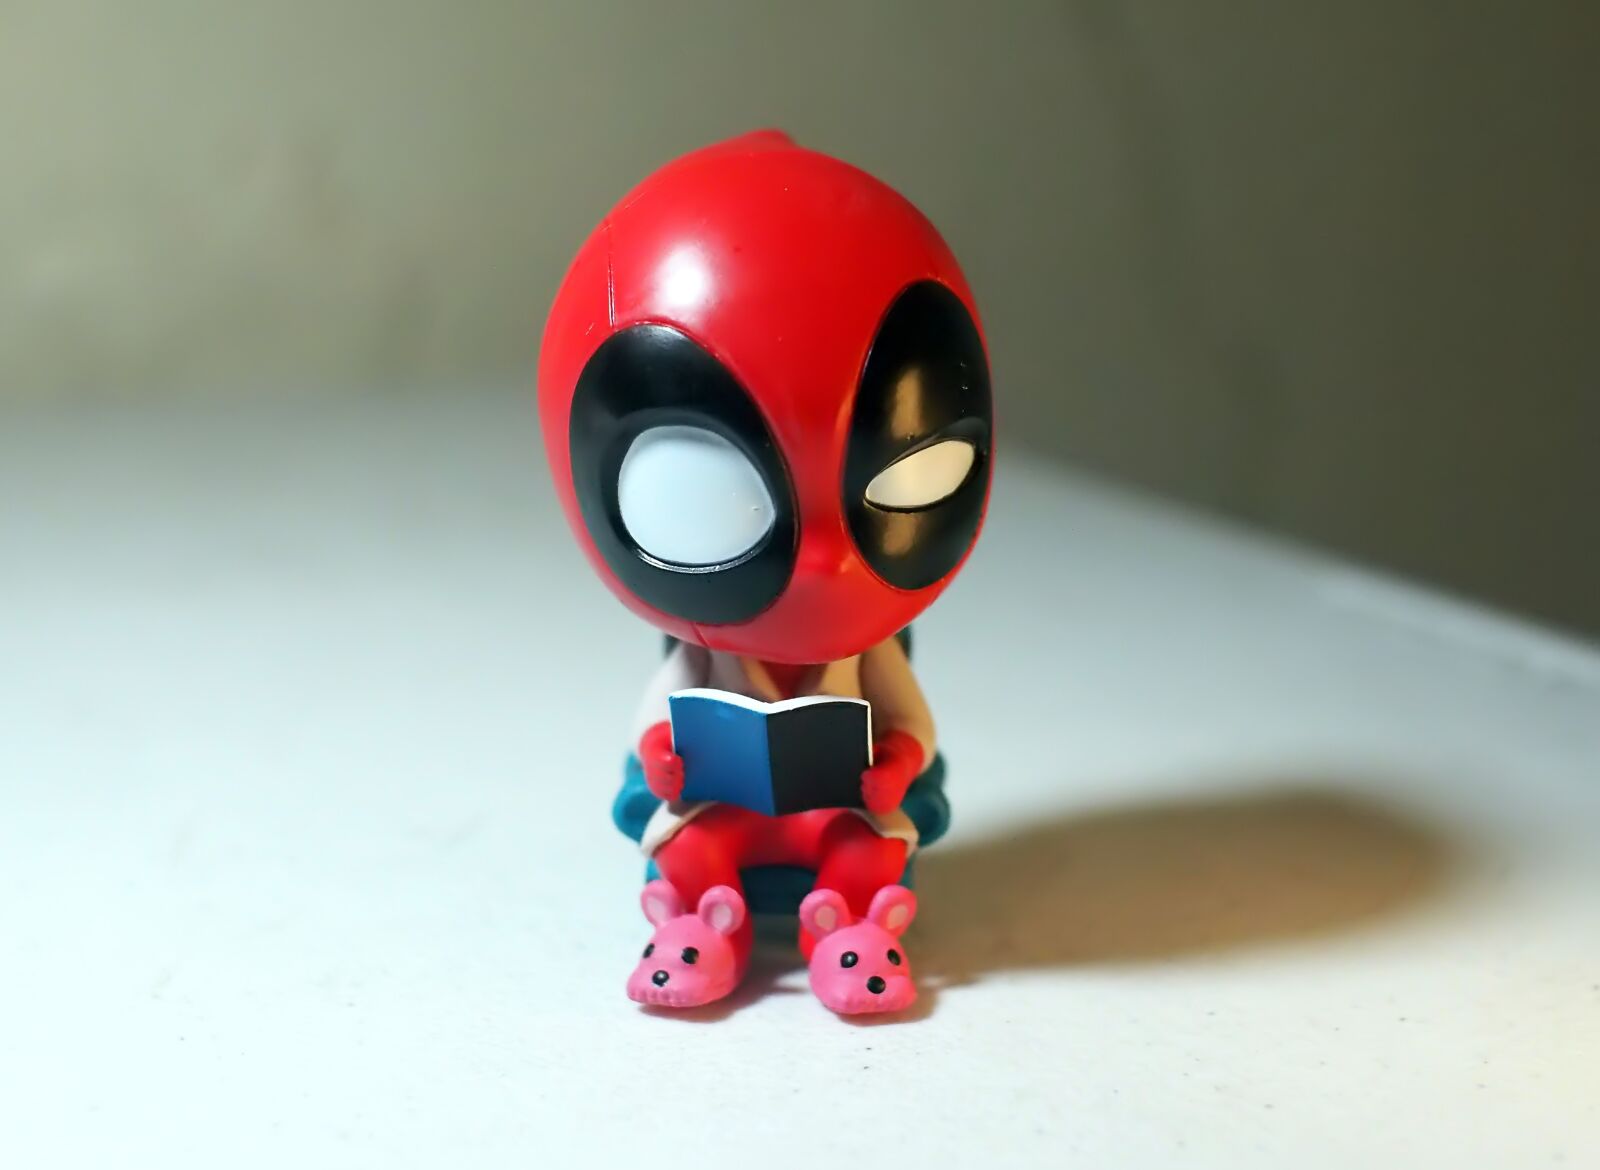 7artisans 25mm F1.8 sample photo. Toy, figurine, small photography